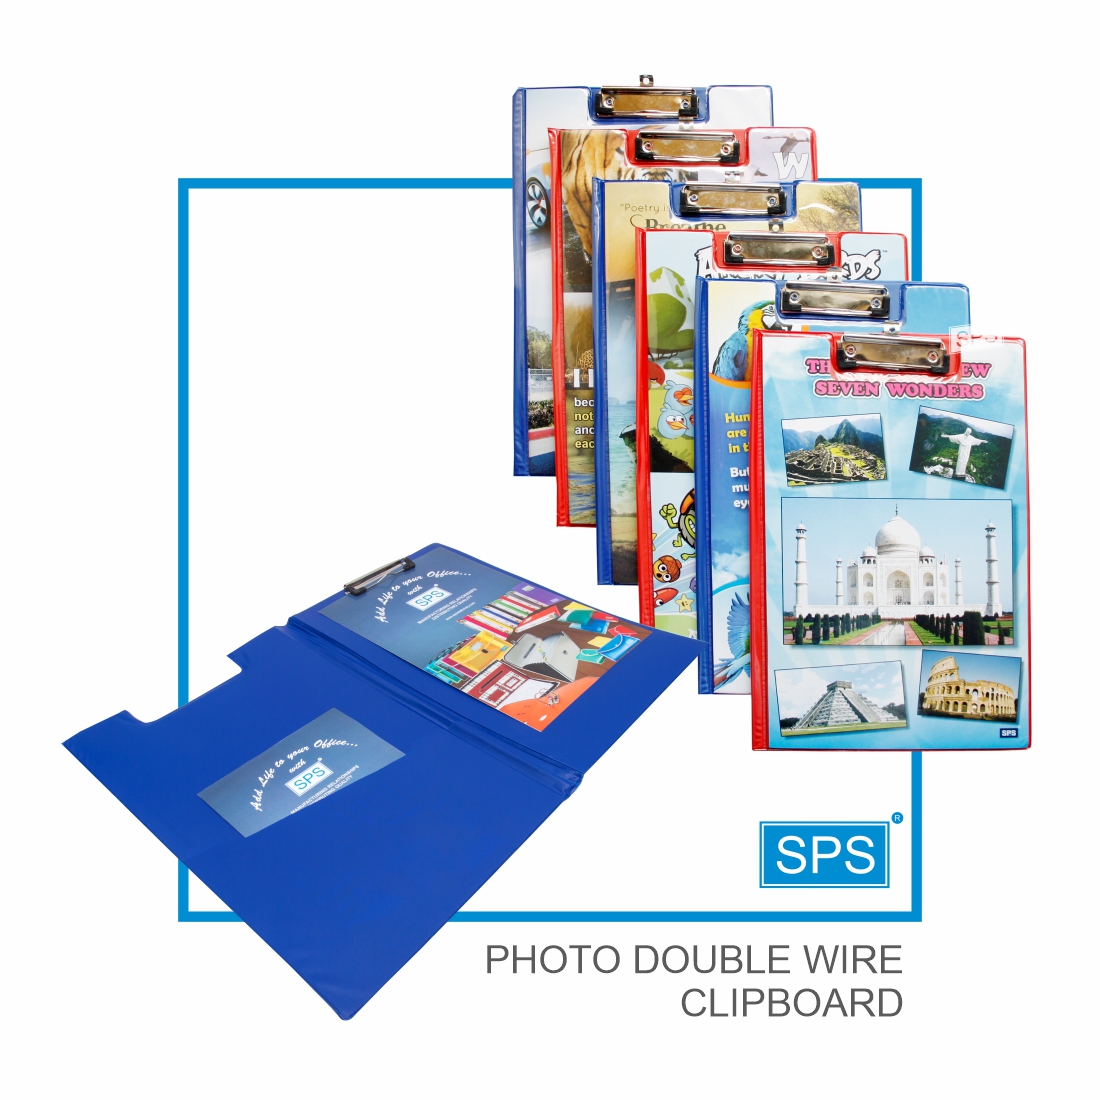 PHOTO DOUBLE WIRE CLIPBOARD